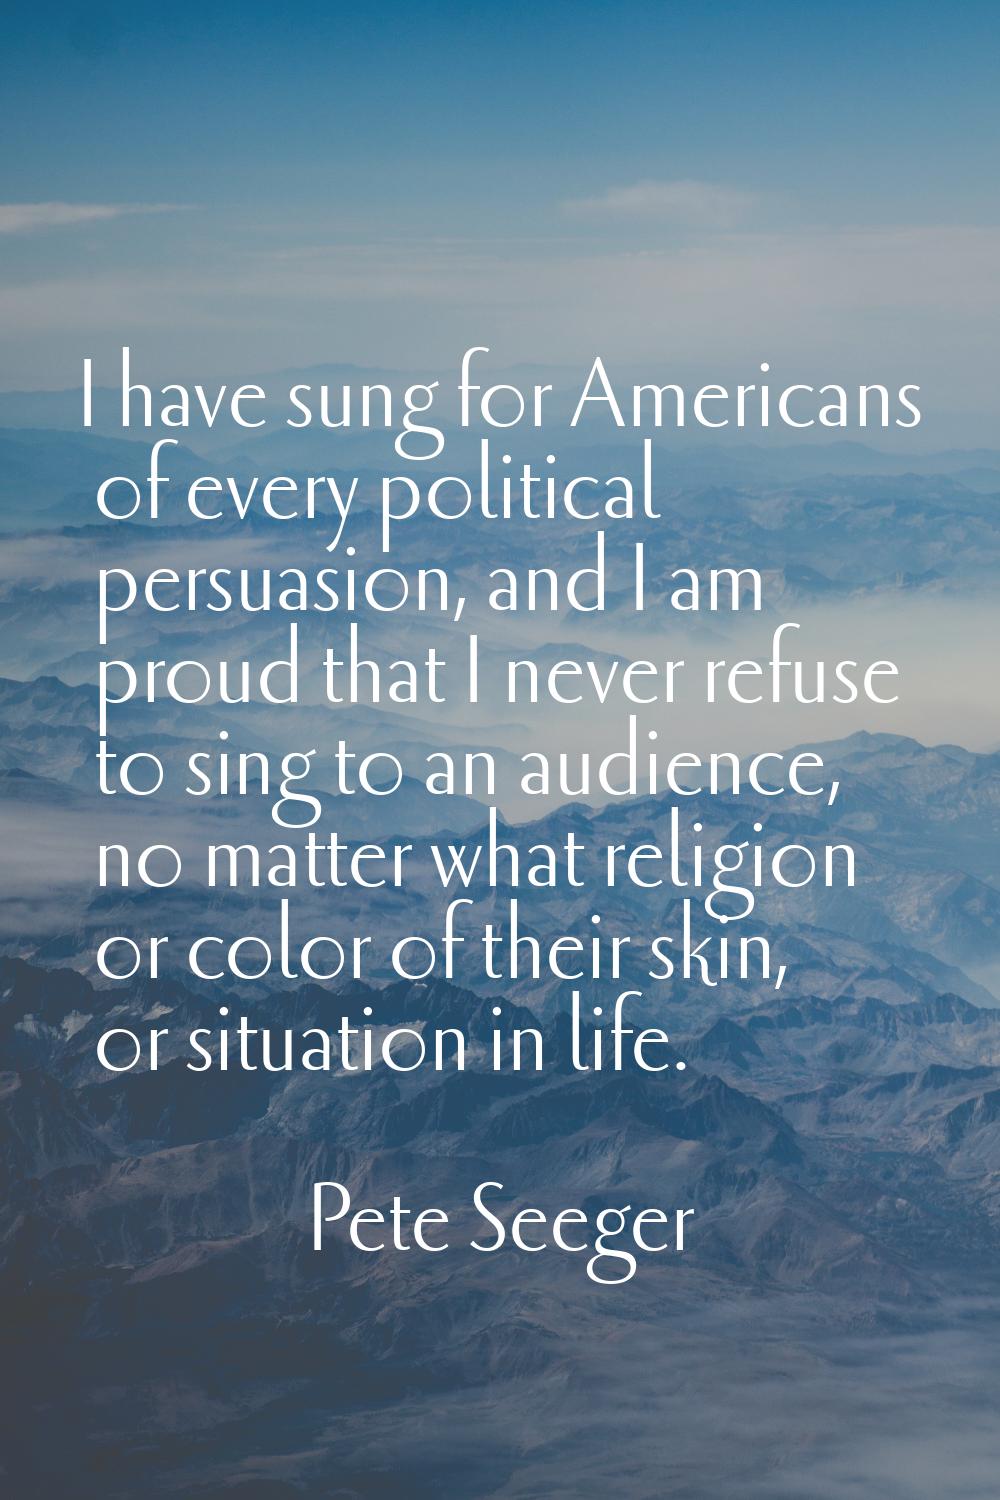 I have sung for Americans of every political persuasion, and I am proud that I never refuse to sing